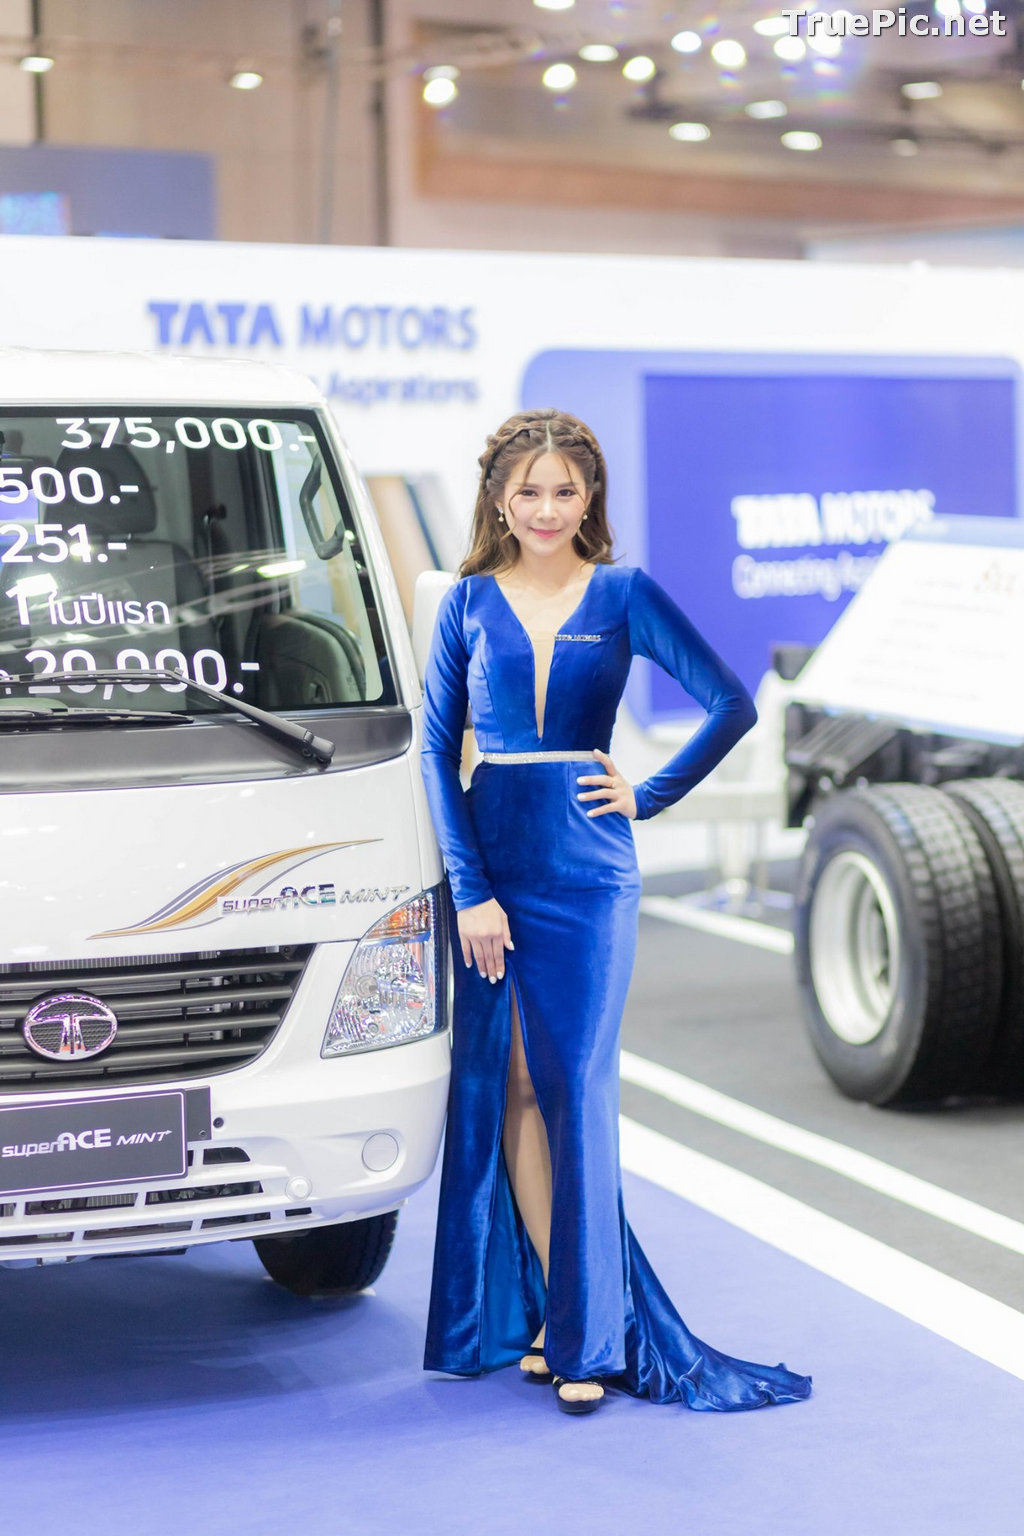 Image Thailand Racing Model at BIG Motor Sale 2019 - TruePic.net - Picture-25